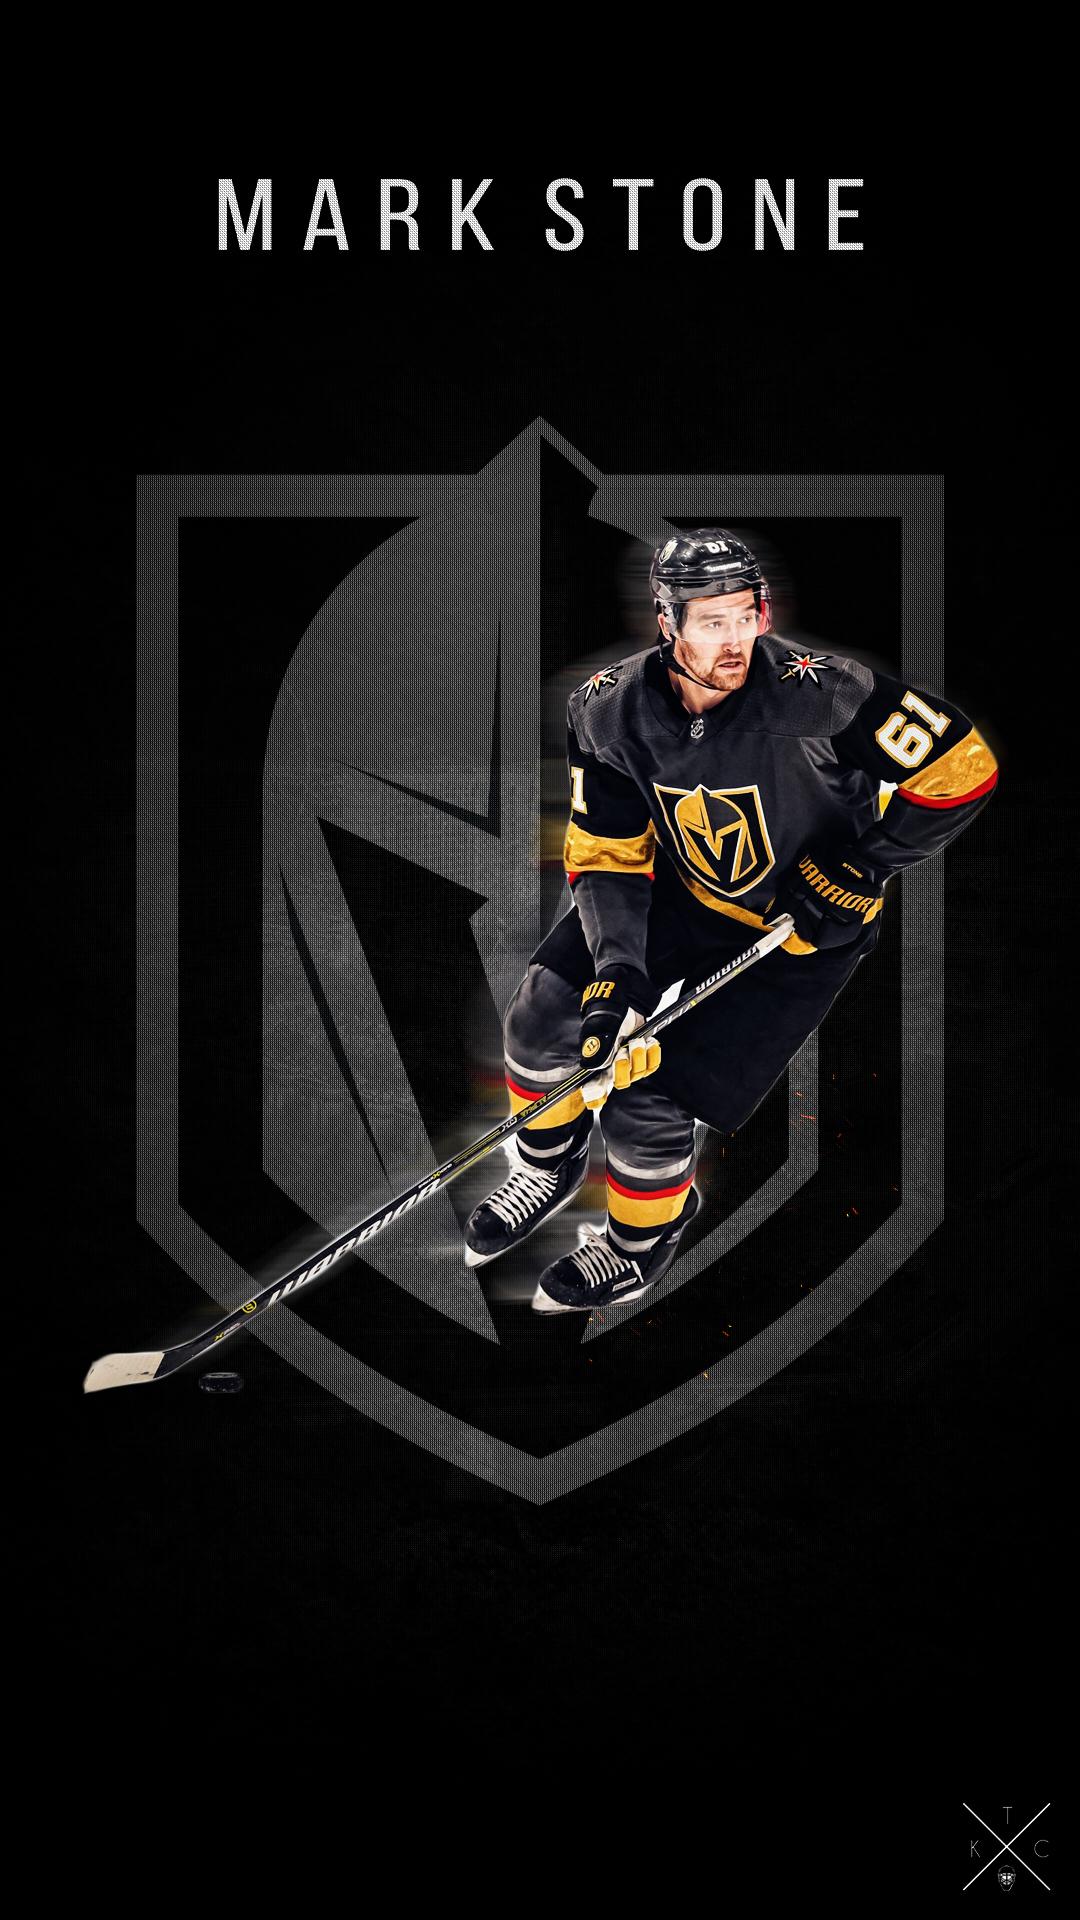 Simplistic Phone Wallpapers I made of Mark Stone : goldenknights